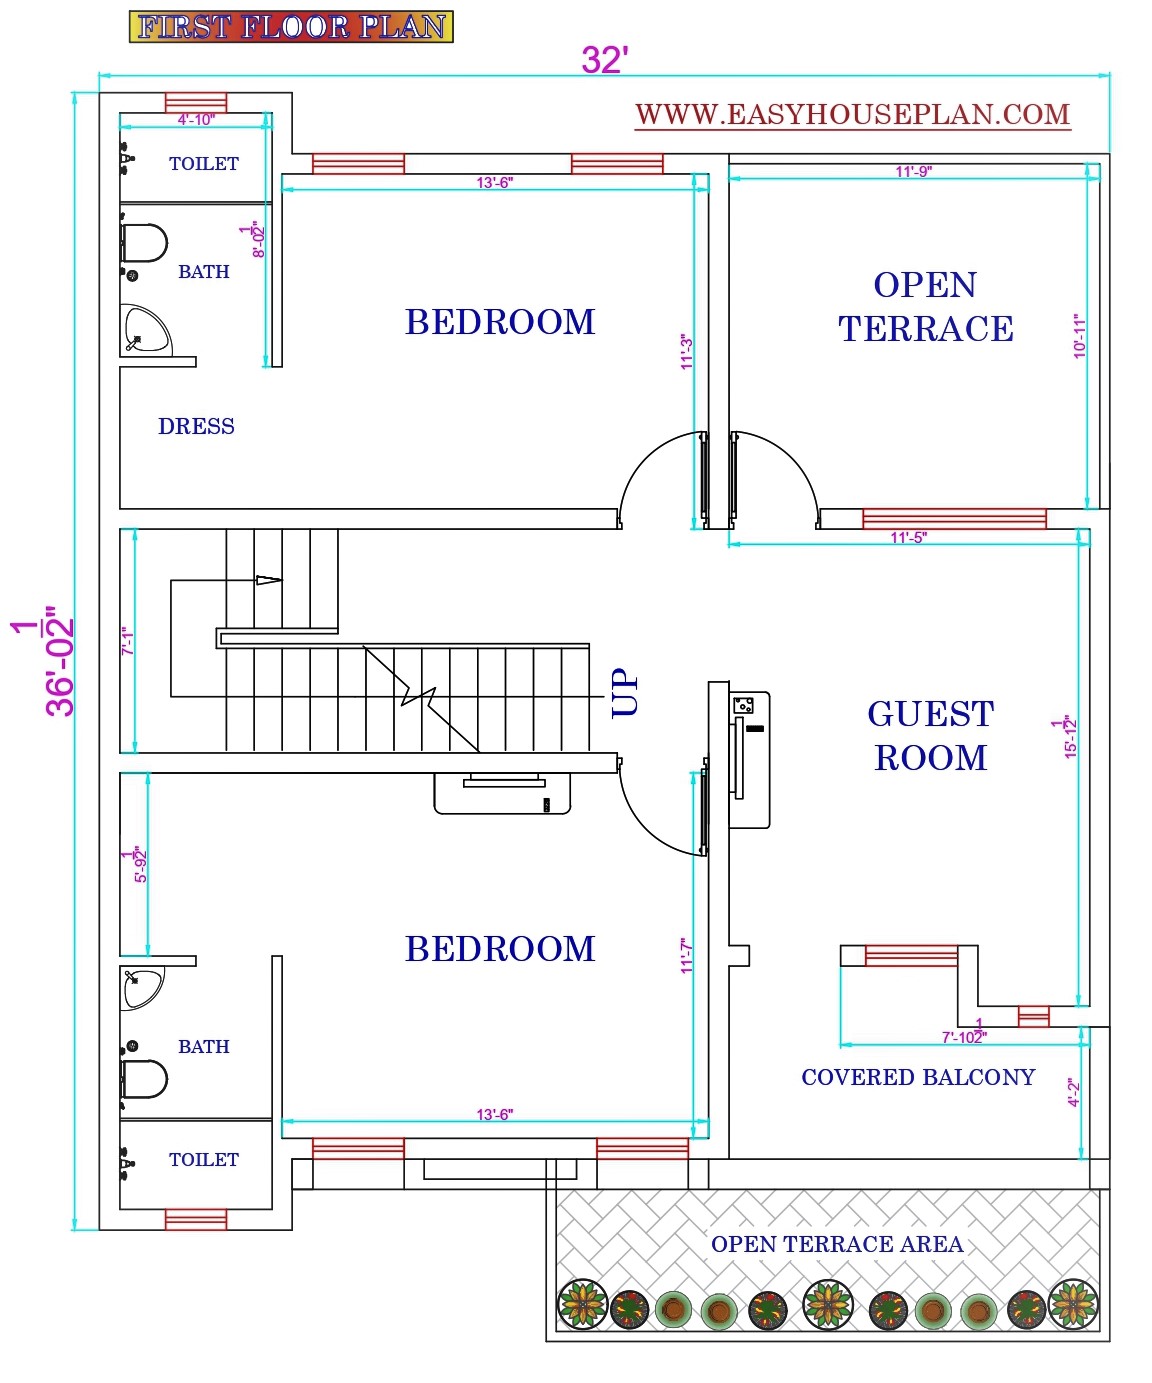 FIRST-FLOOR-PLAN-FOR-32-FEET-BY-48-FEET